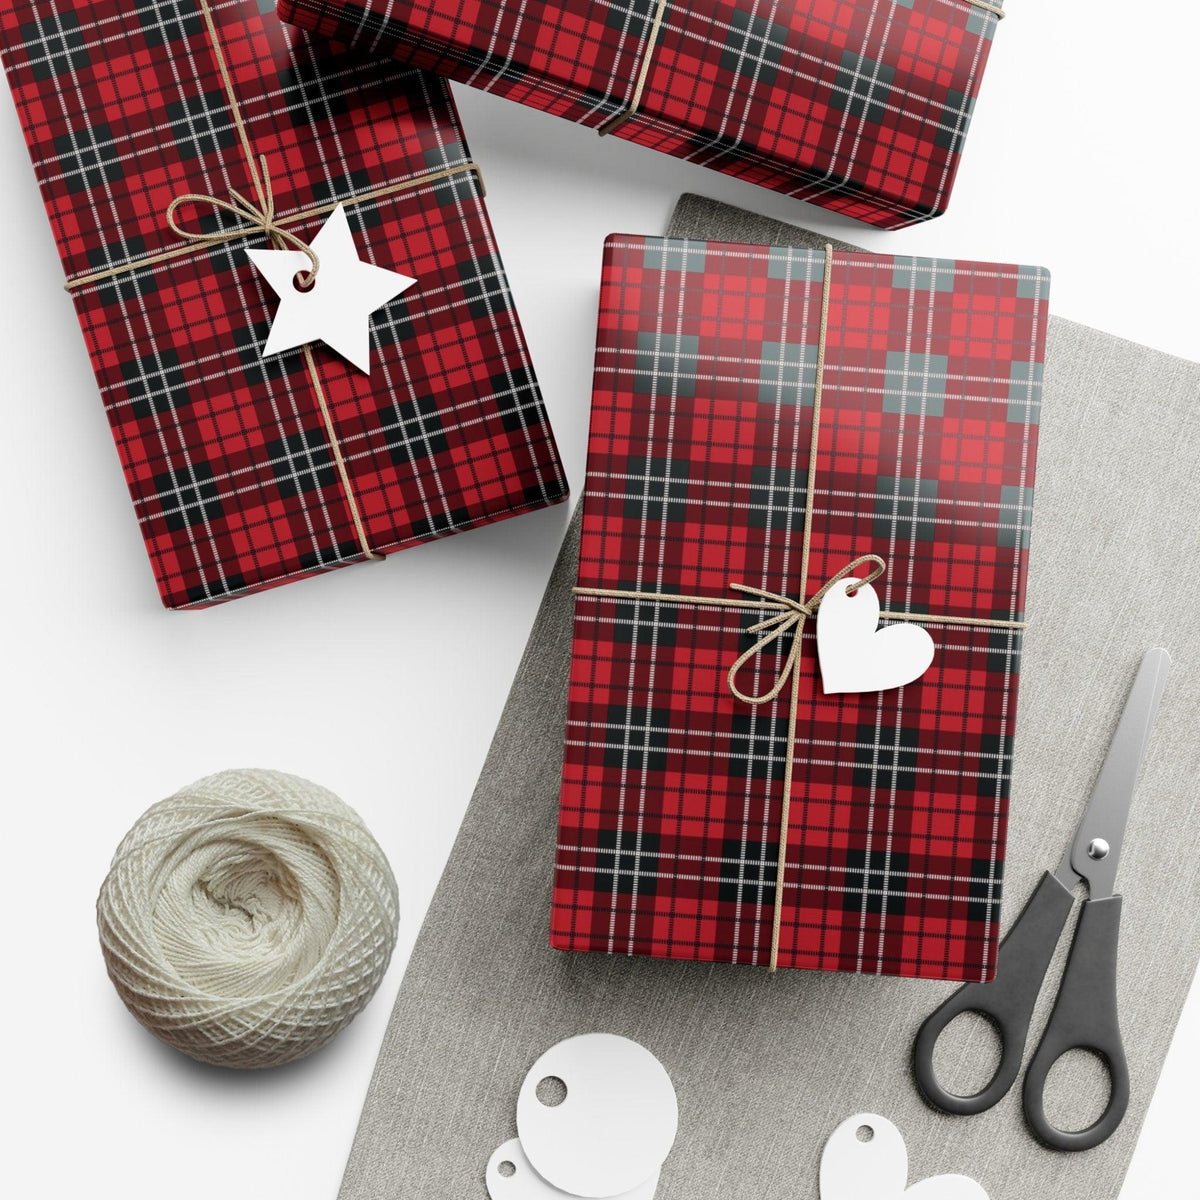 Red Plaid Christmas Gift Wrap Plaid Red Gift Paper Christmas Gift Wrapping Paper Red Plaid Traditional Christmas Paper Red Vintage Gift Wrap - The Ripple Effect Co.US